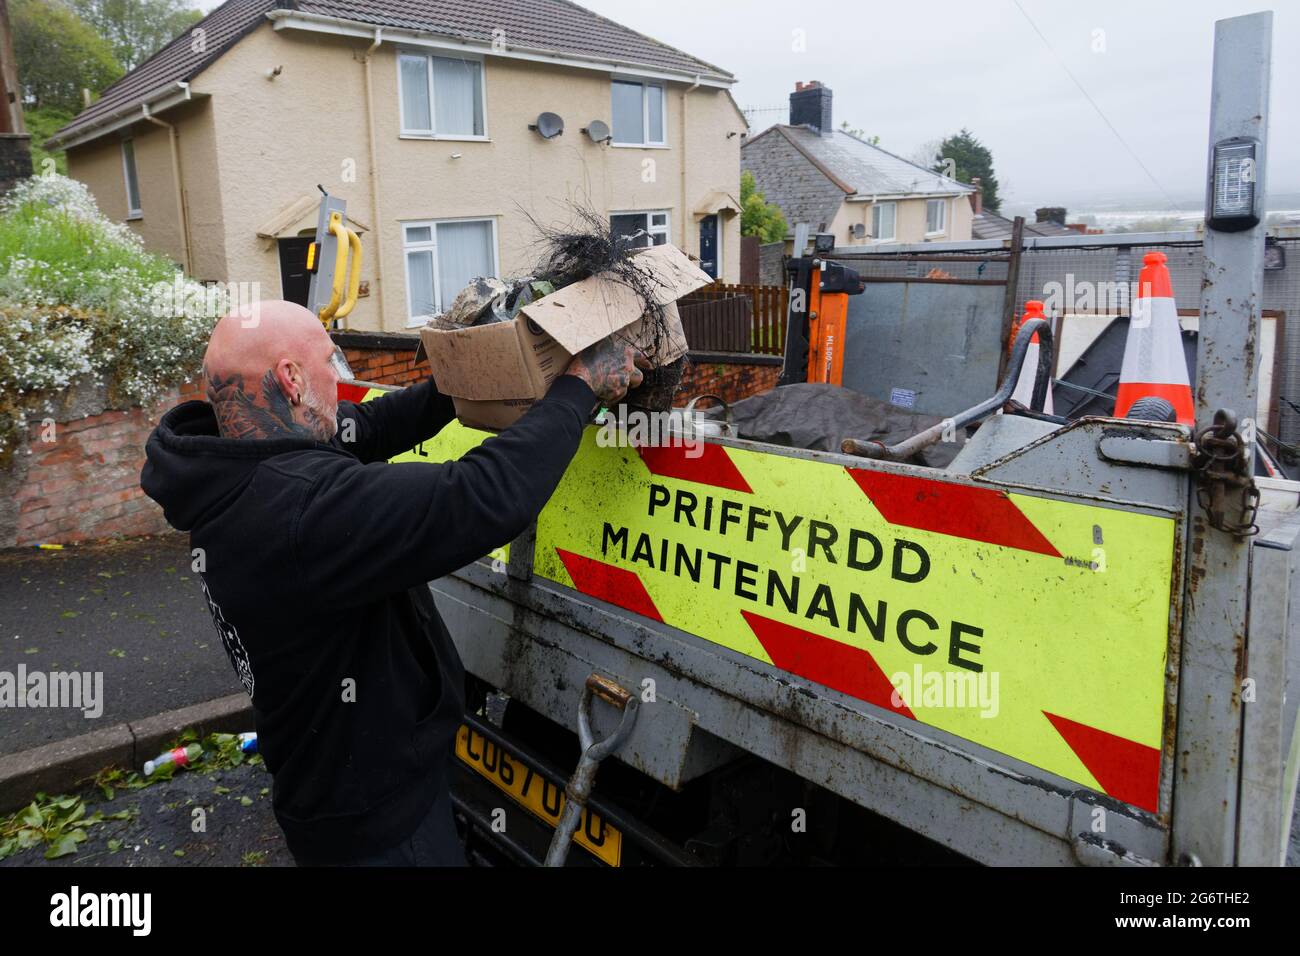 Pictured: Locals and Council workers clean up in Waun-Wen Road in the Mayhill area of Swansea, Wales, UK. Friday 21 May 2021 Re: Gangs of 'yobs' have Stock Photo